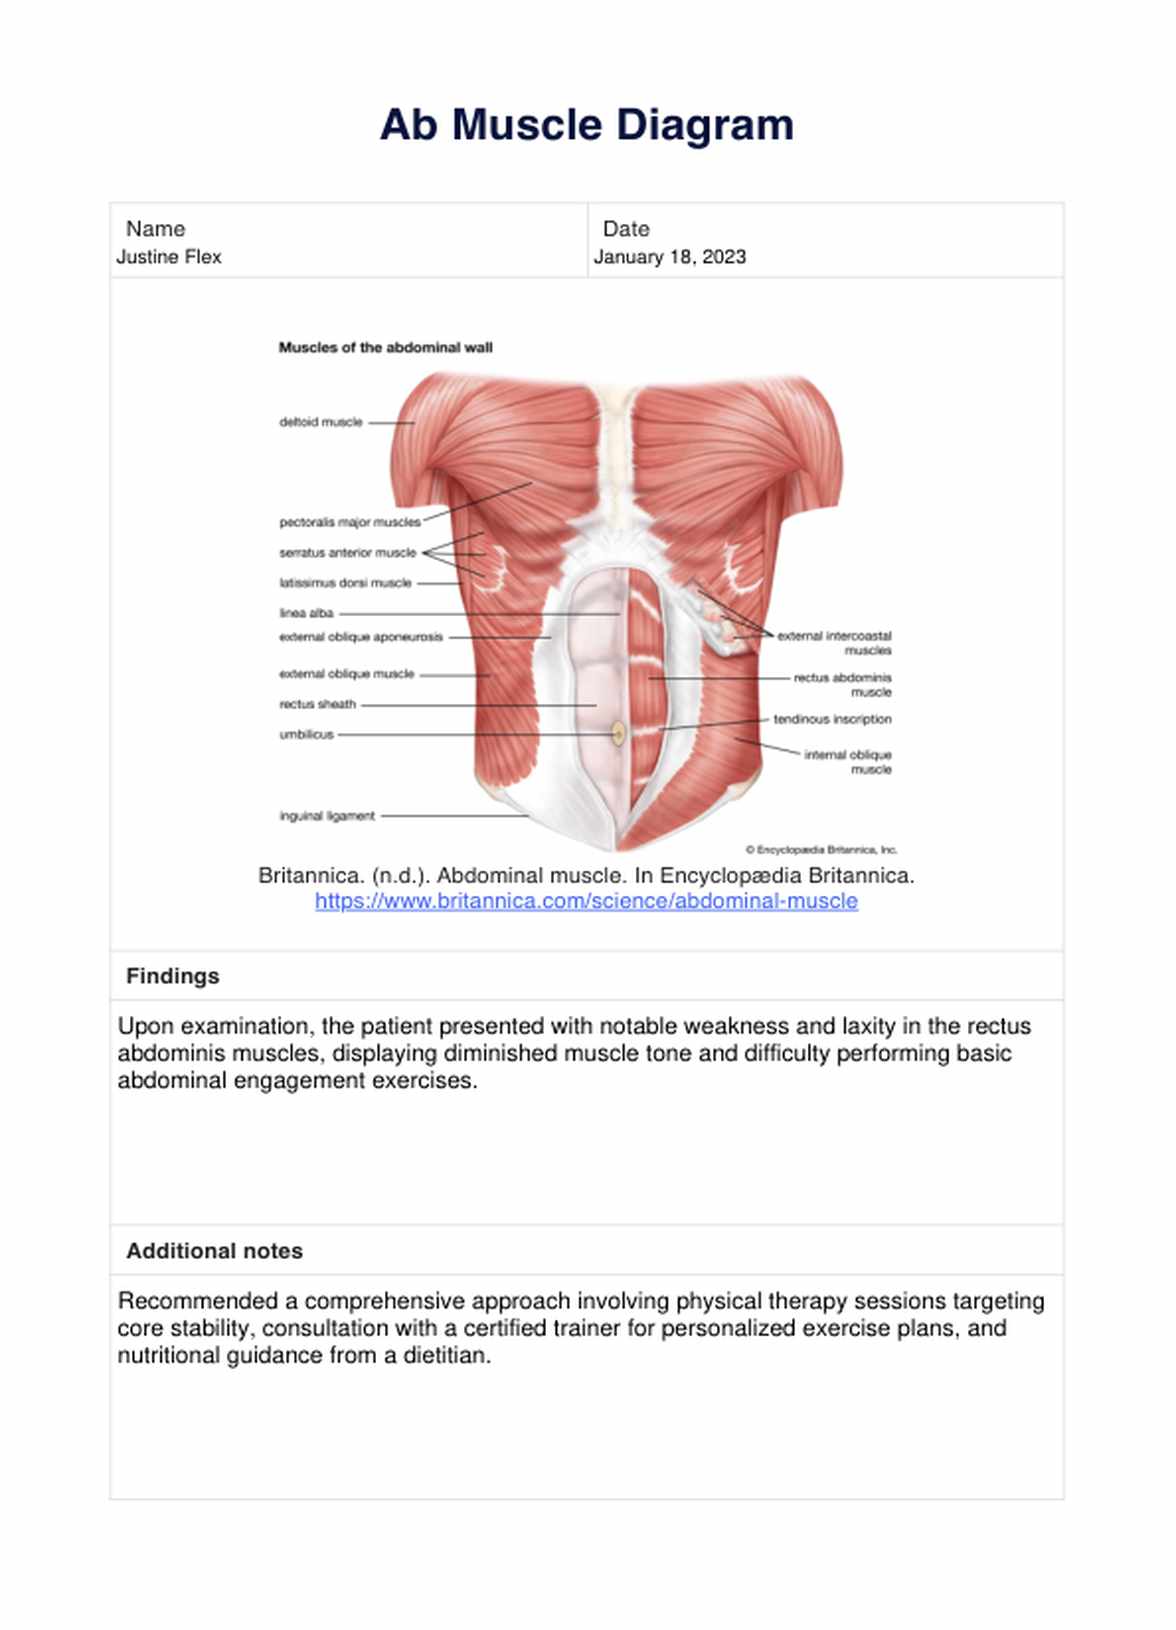 Ab Muscle Diagram PDF Example